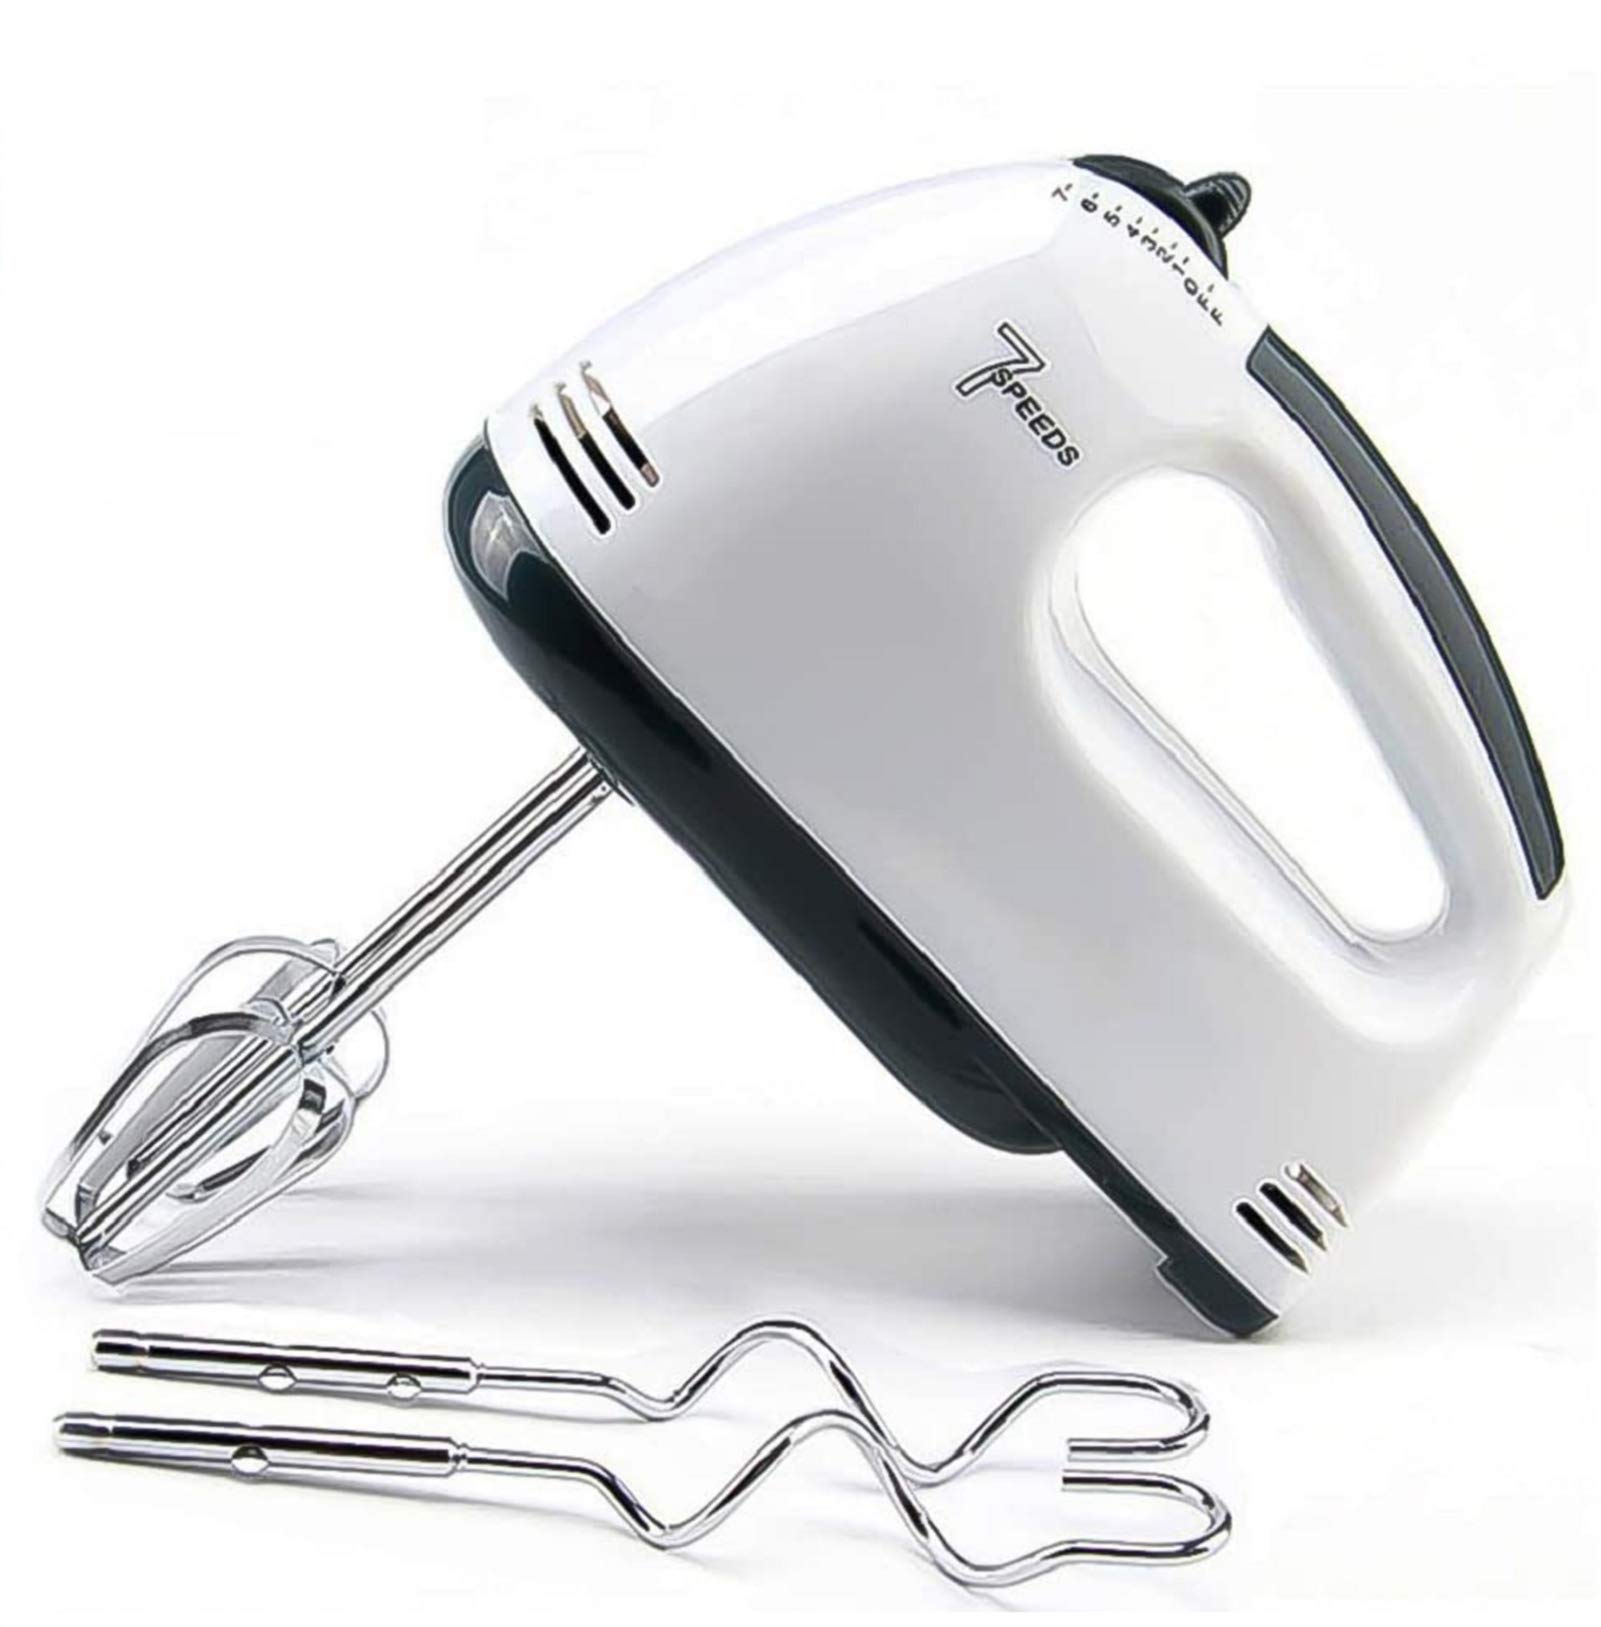 SFXFJ Hand Mixer Electric, 7 Speeds, 100 Watts, 110 Voltage, Stainless Steel Rods, Dough Hooks & Mixer Beaters for Dressings, Frosting, Meringues & More, High Capacity Whisk, White